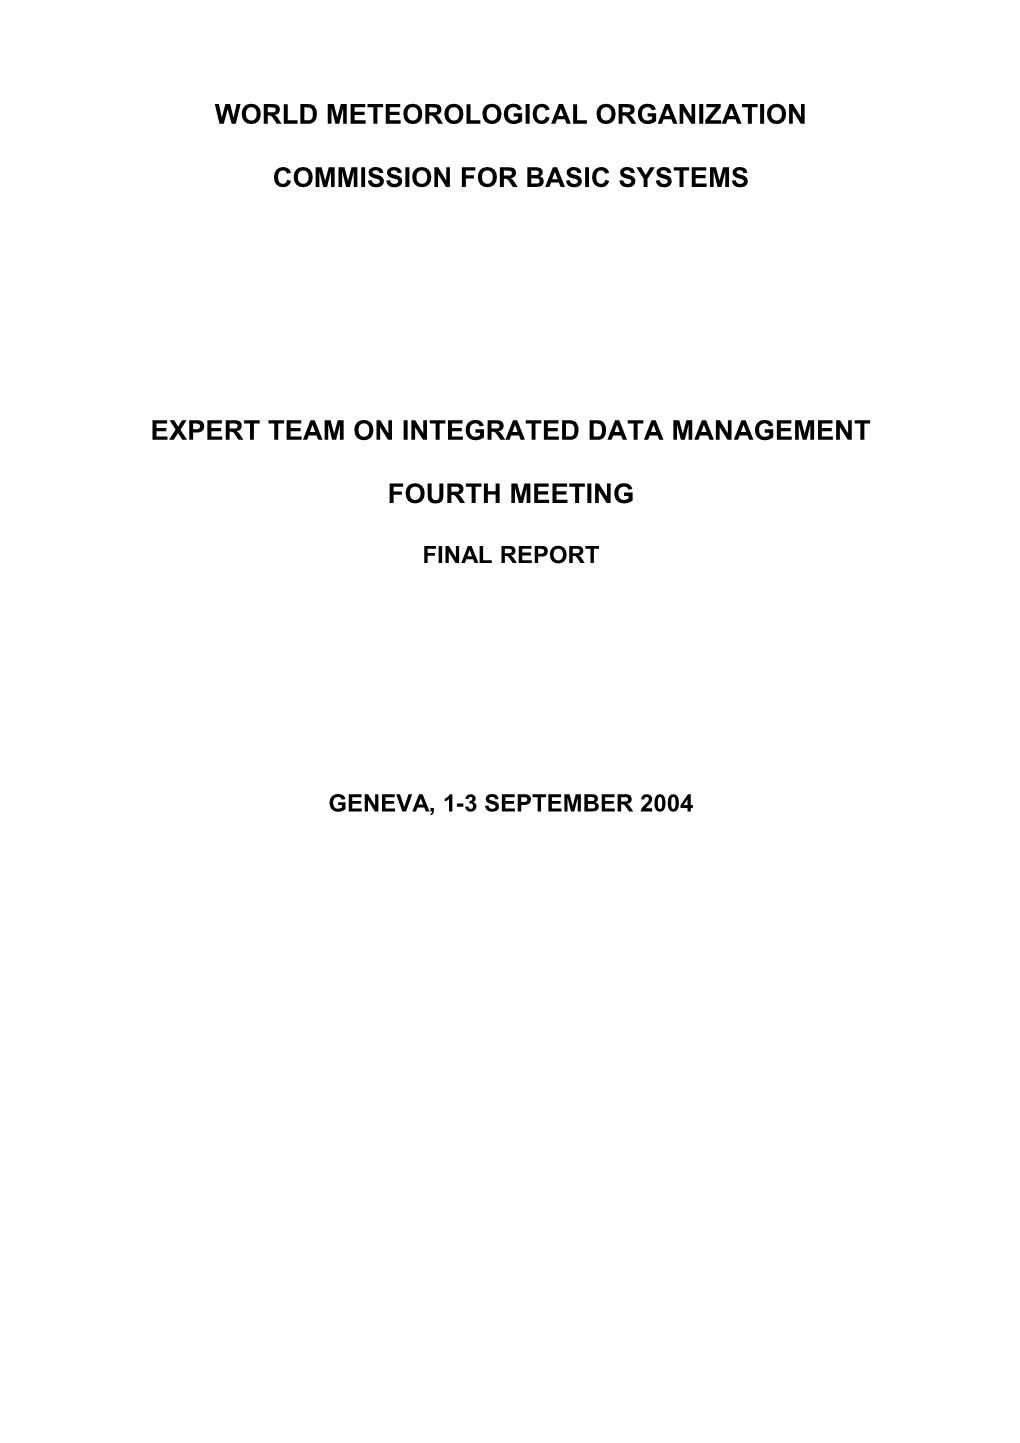 Report of ET on Integrated Data Management - 2002 s1